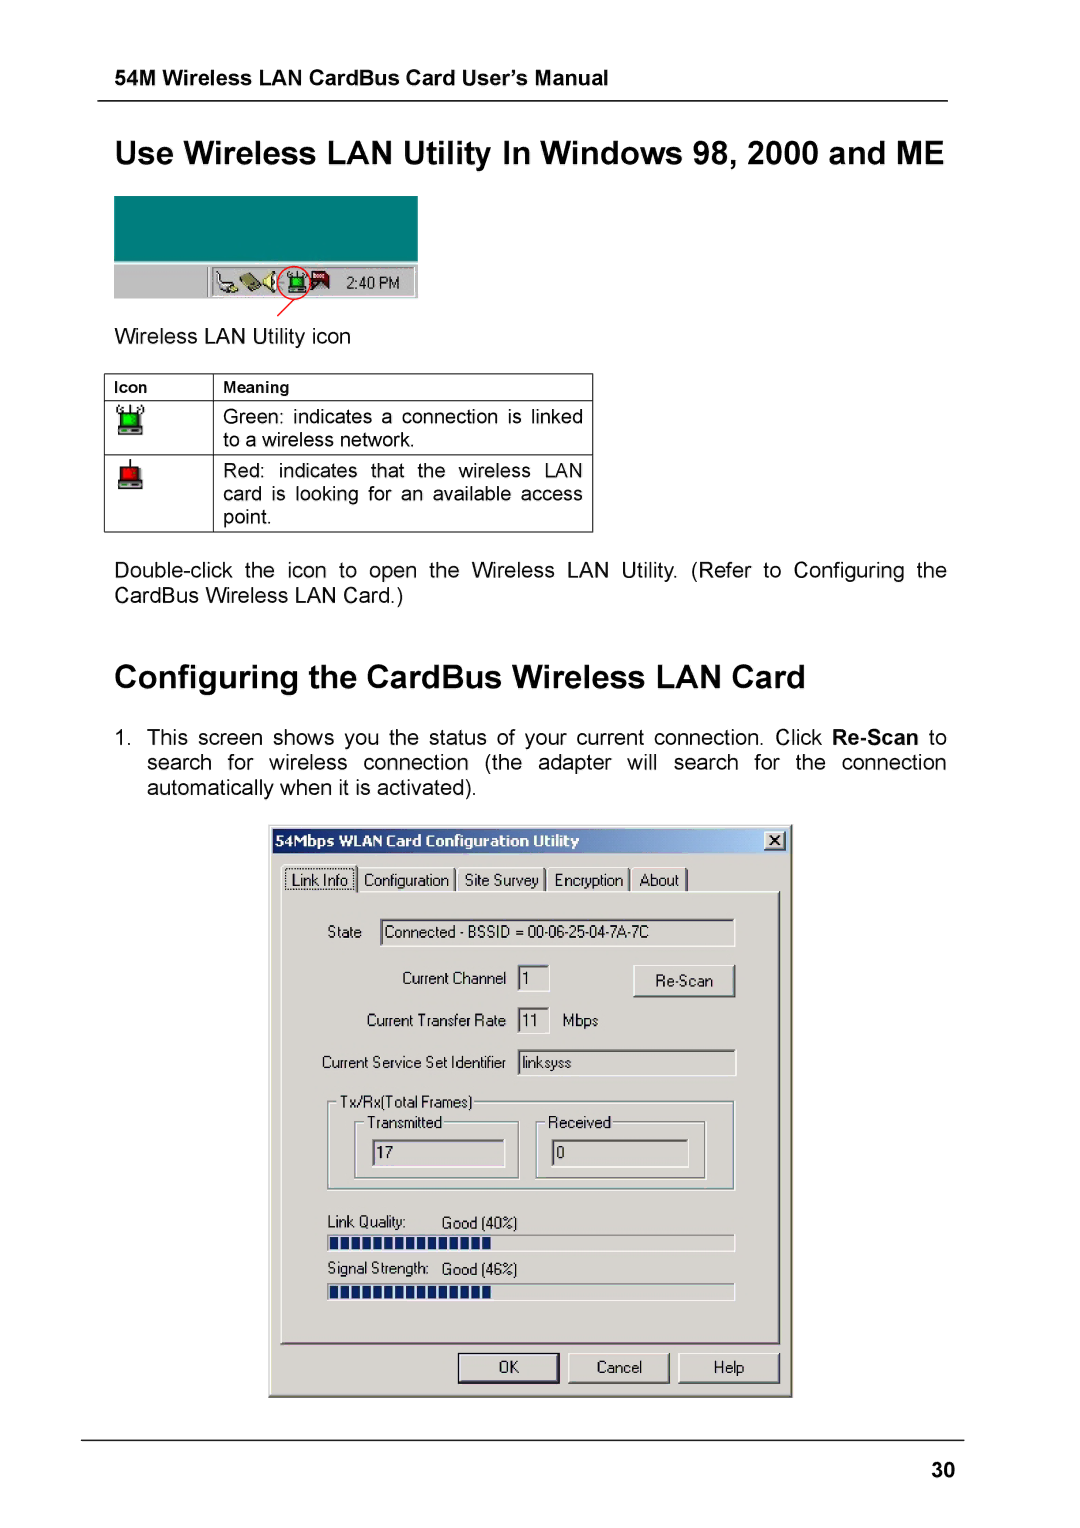 Boca Research 54M Use Wireless LAN Utility In Windows 98, 2000 and ME, Configuring the CardBus Wireless LAN Card 